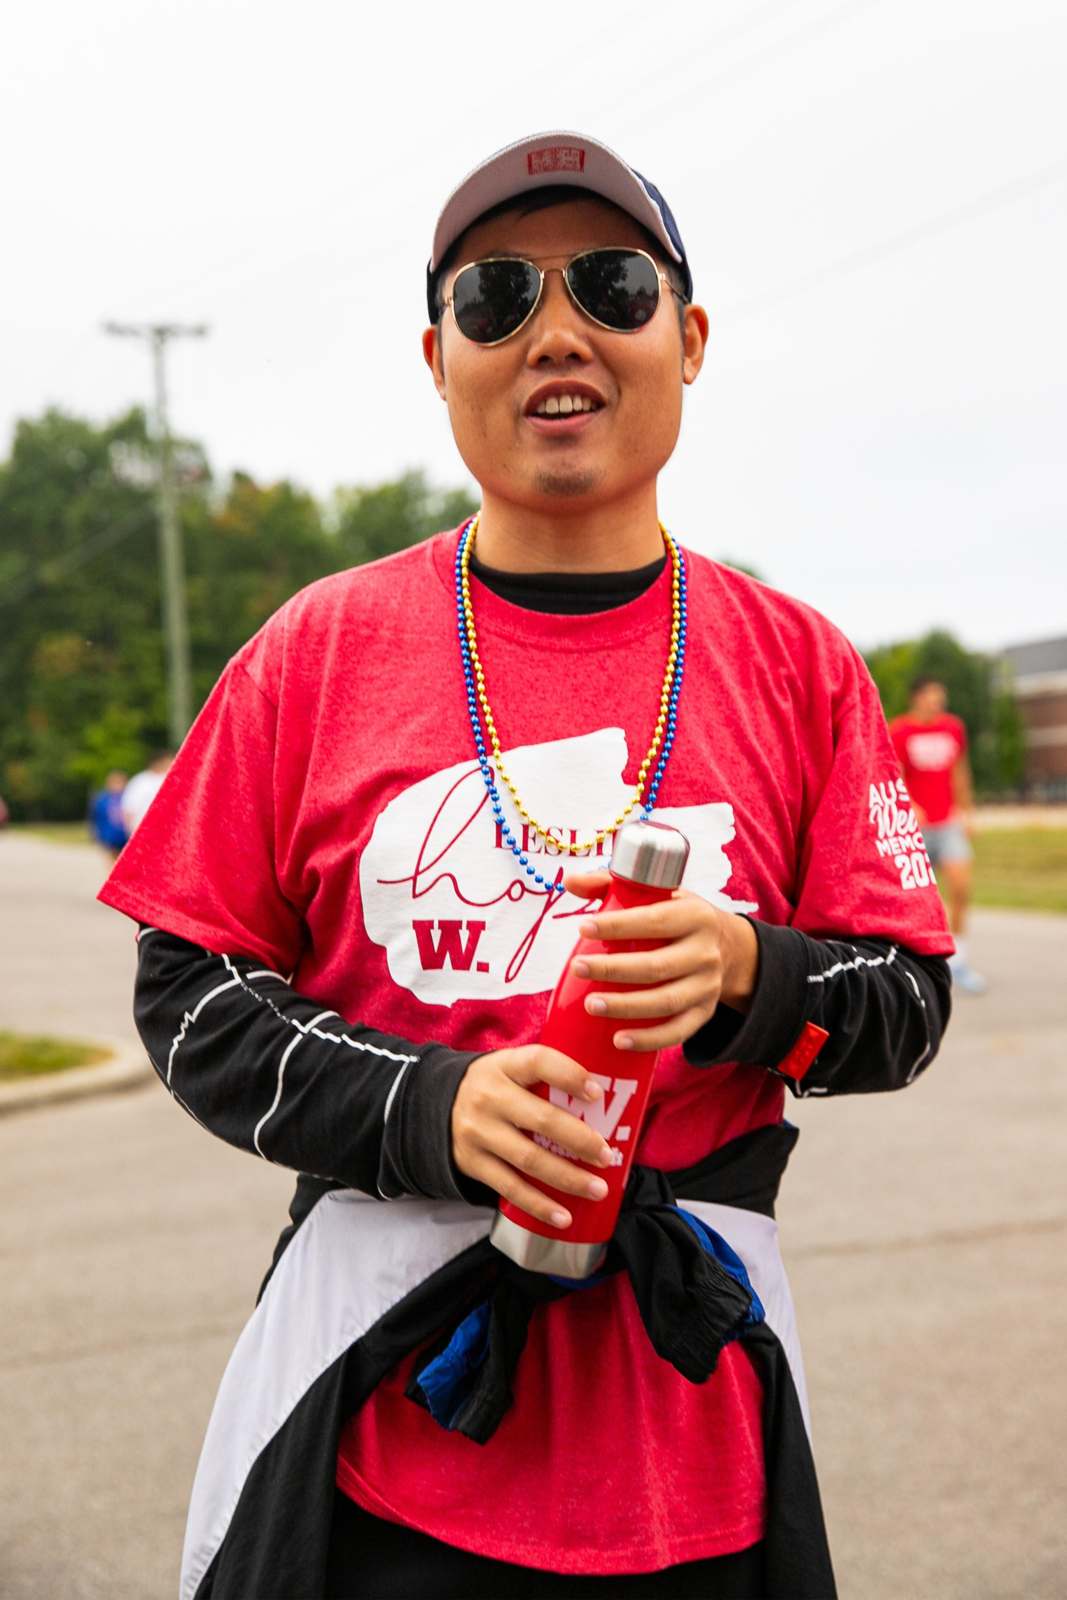 a man wearing a red shirt and sunglasses holding a red bottle